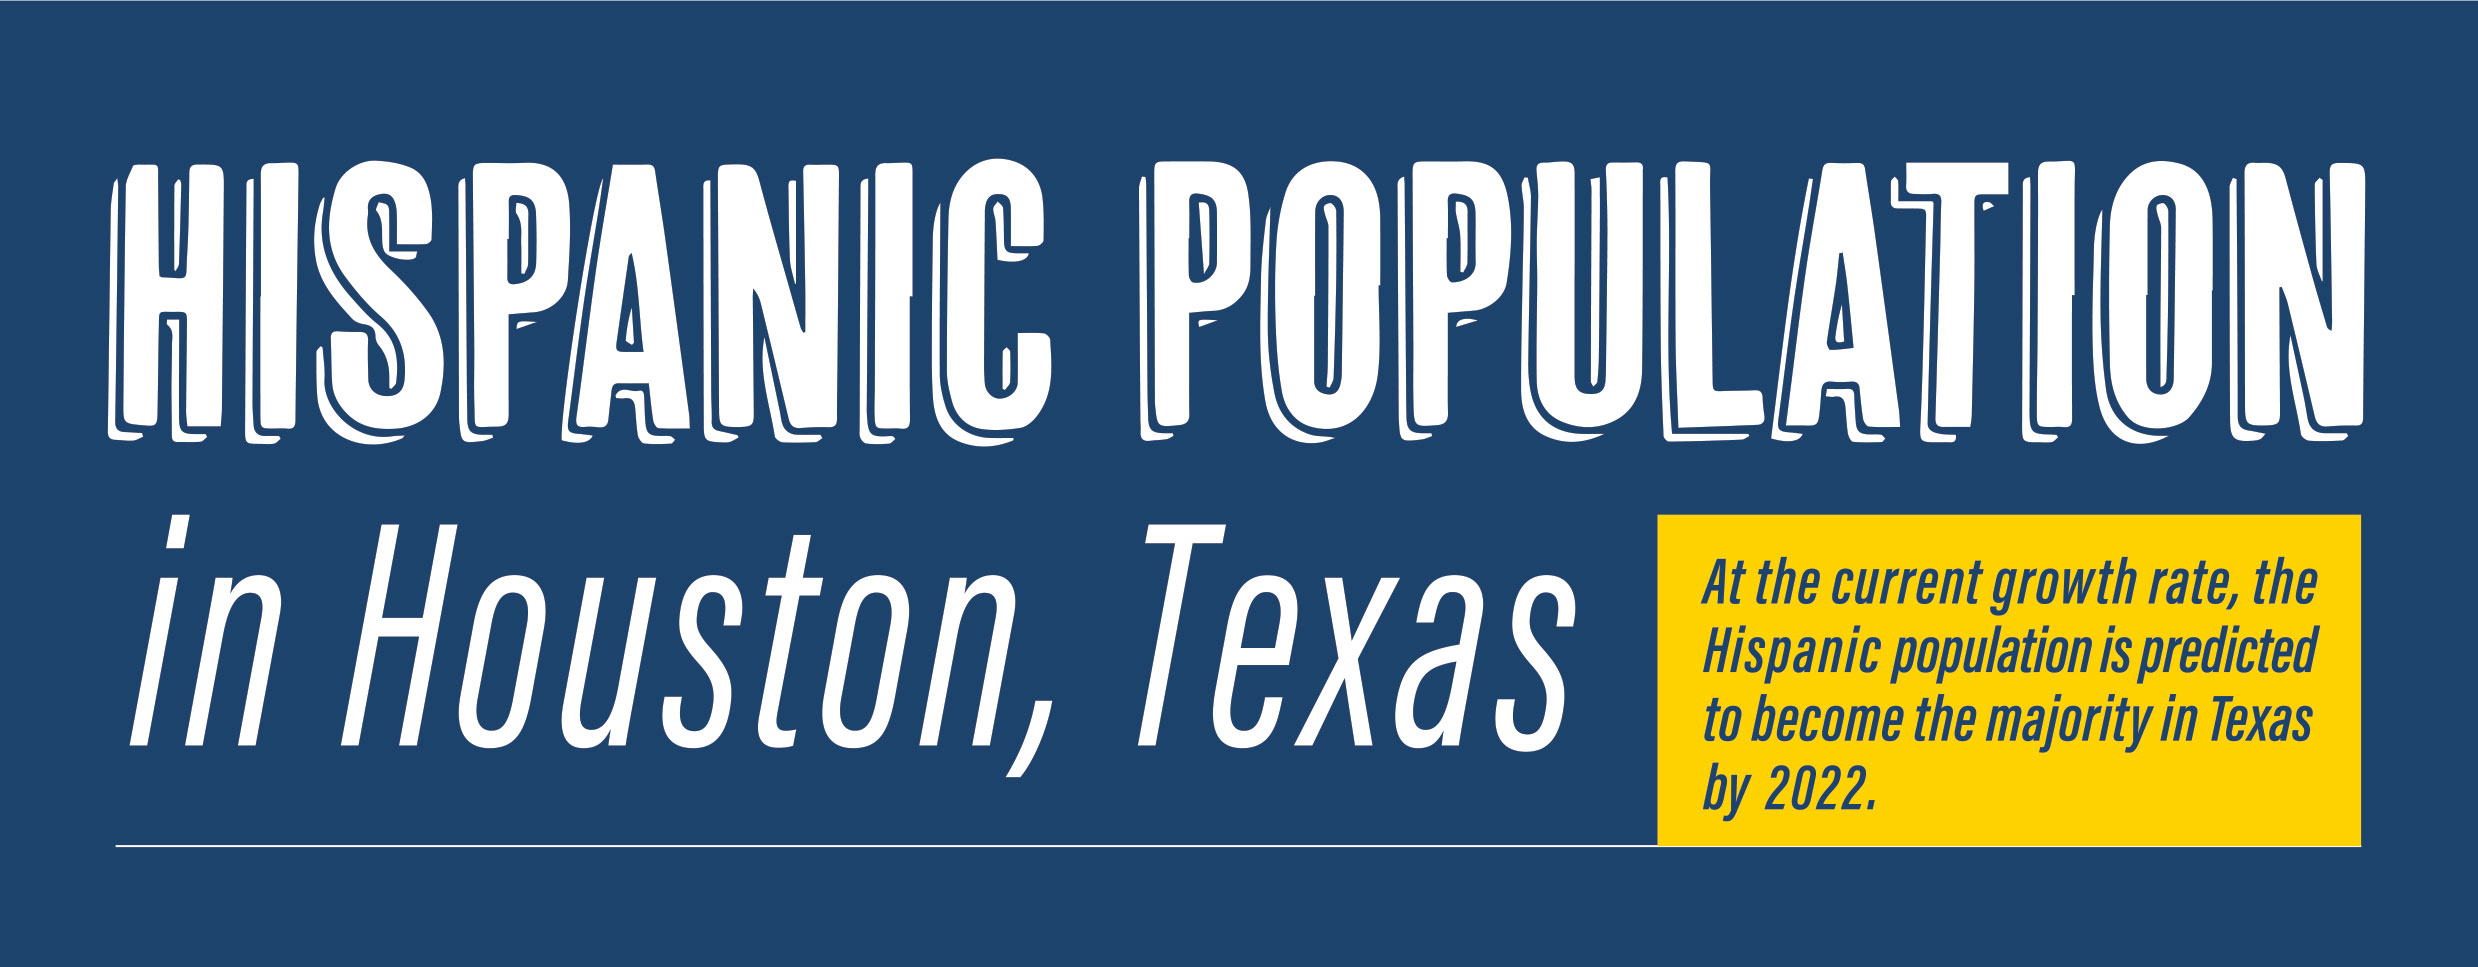 GRAPHIC: Hispanic Population in Houston, Texas – At the current growth rate, the Hispanic population is on track to become the largest ethnic group in Texas by 2022. Graphic created by The Signal Reporter Emily Dundee.